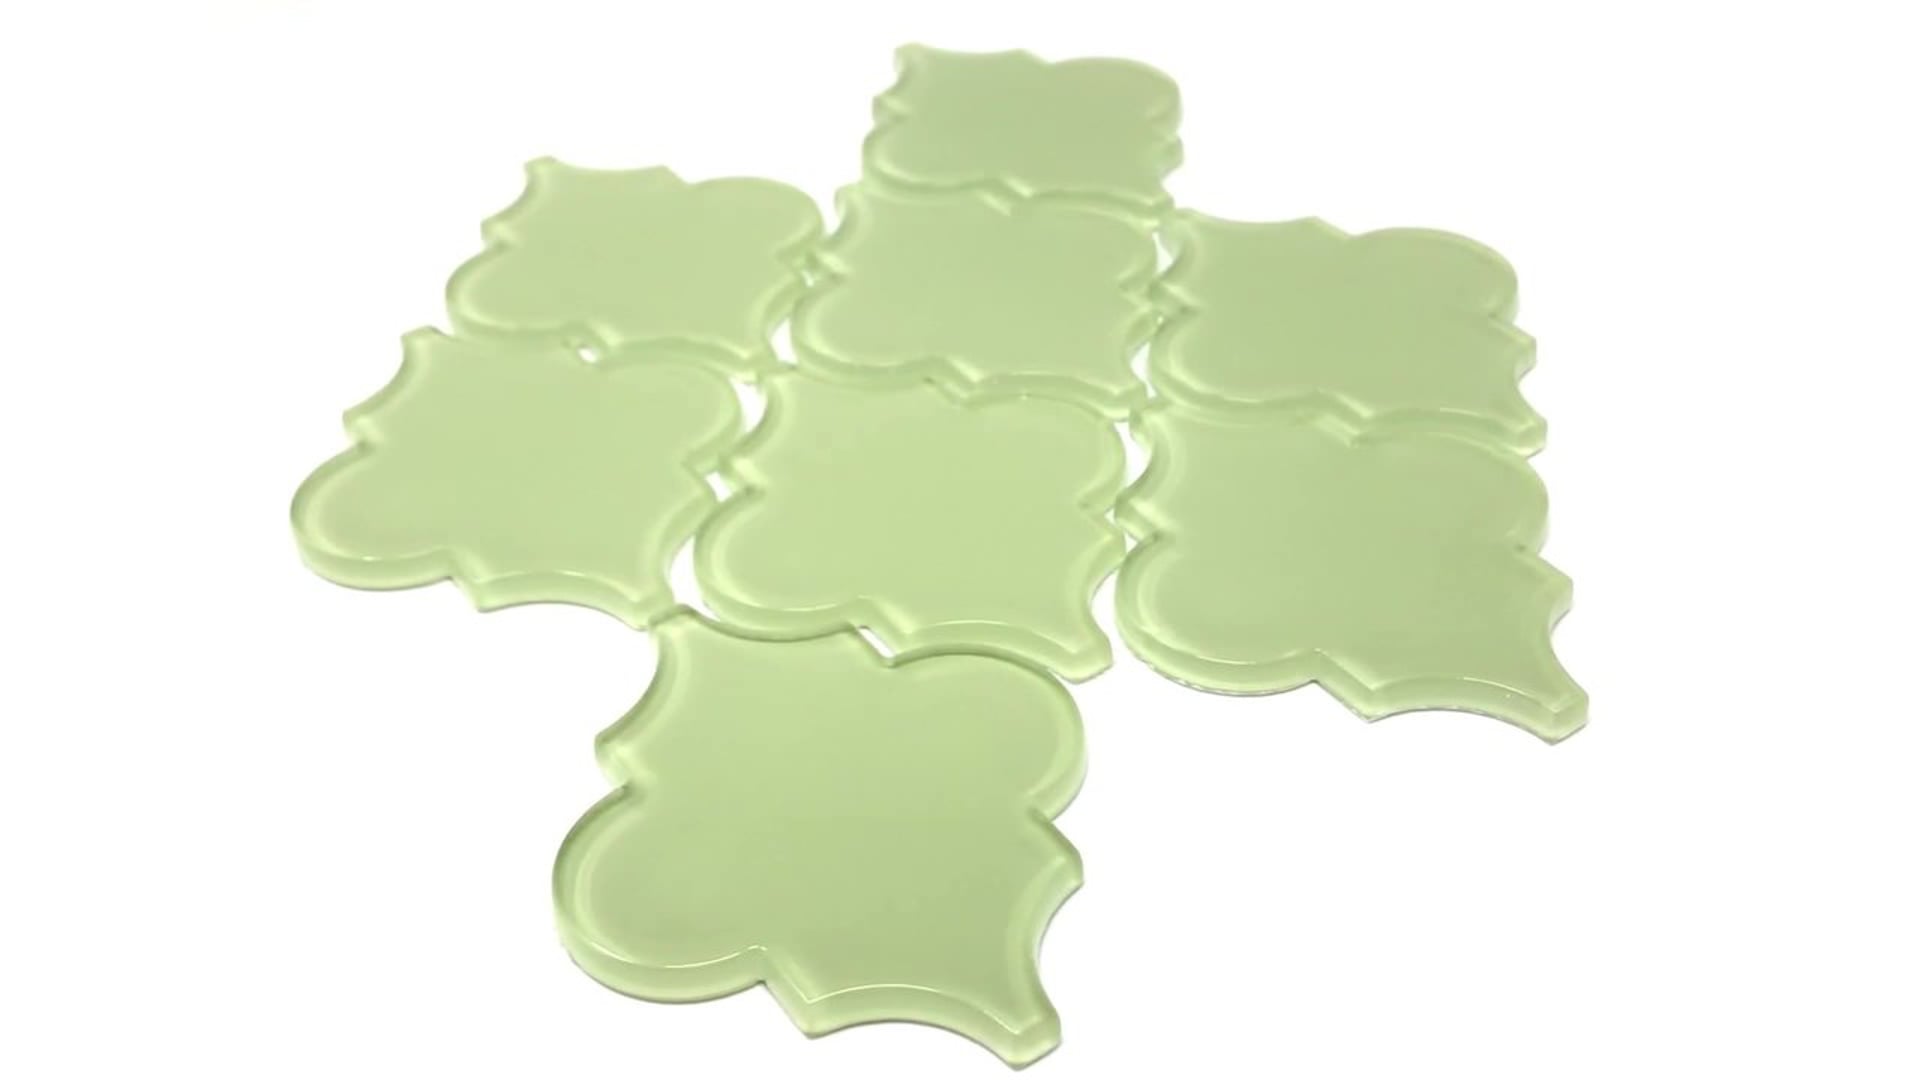 12"x13" Arabesque Collection, Set of 11, Light Olive